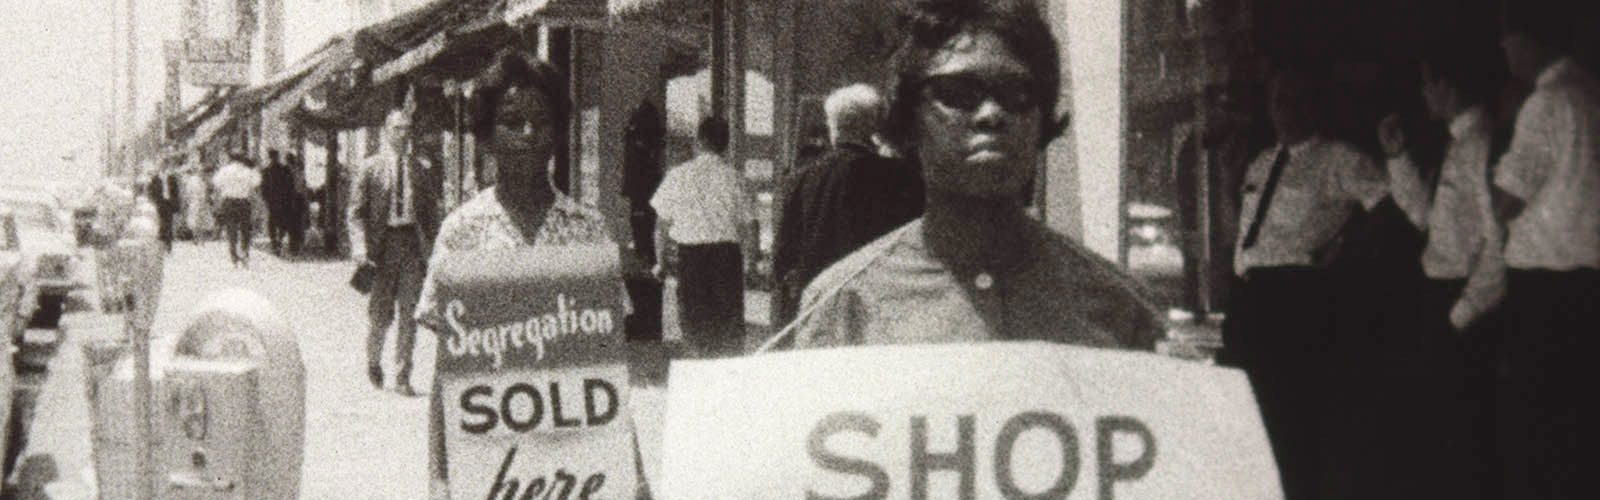 WSB-TV newsfilm clip of African American women arrested for picketing in Albany, Georgia, 1962